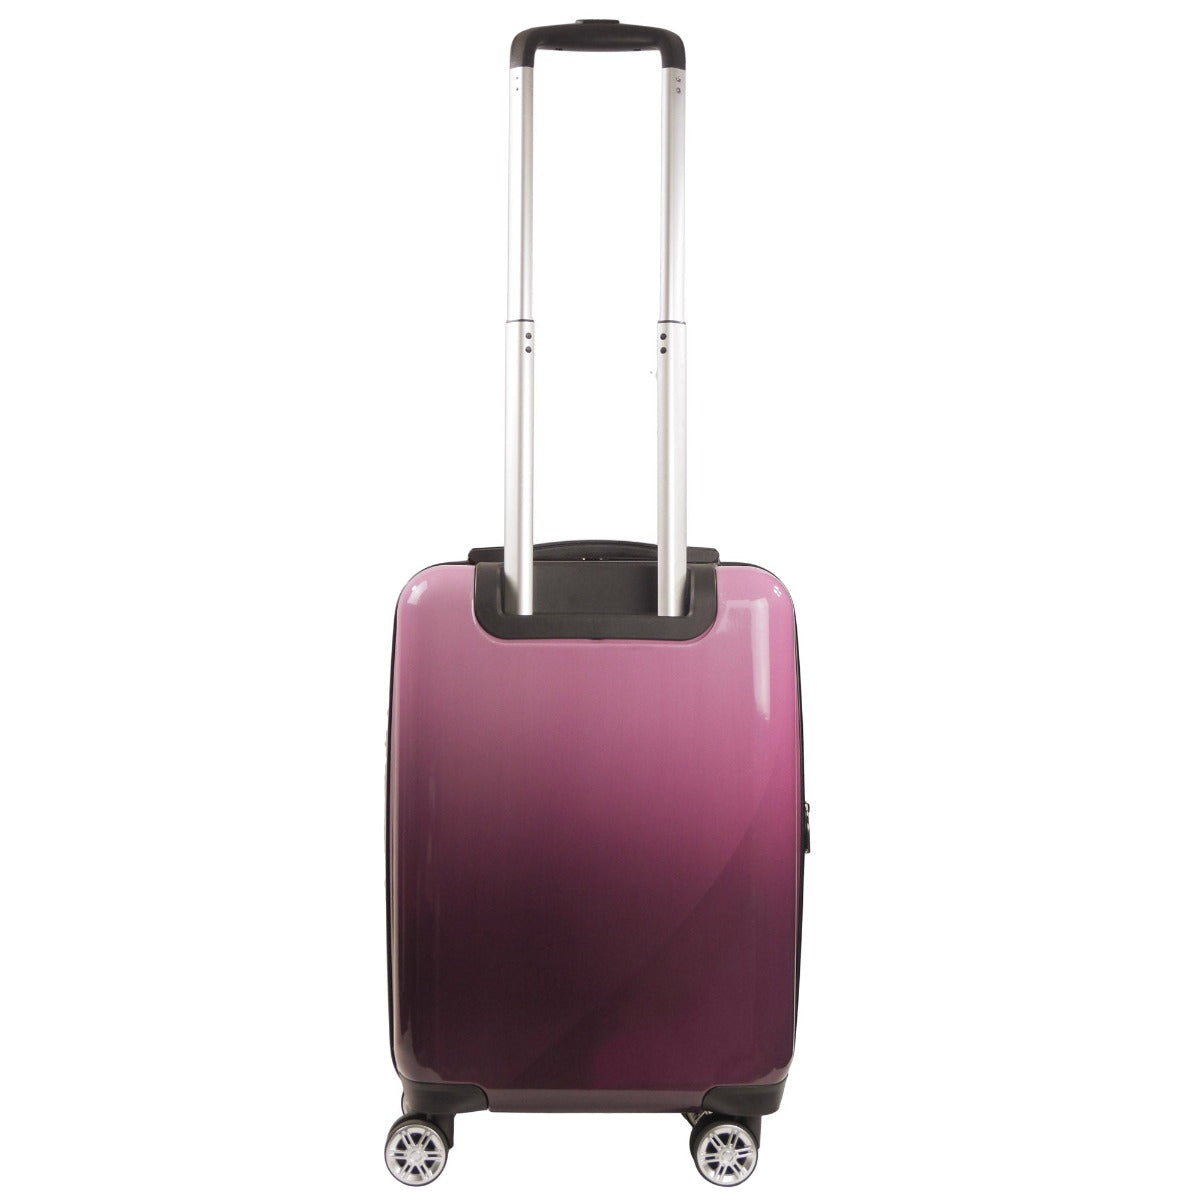 Ful Impulse Ombre Hardside Spinner Suitcase 22" Luggage, Pink